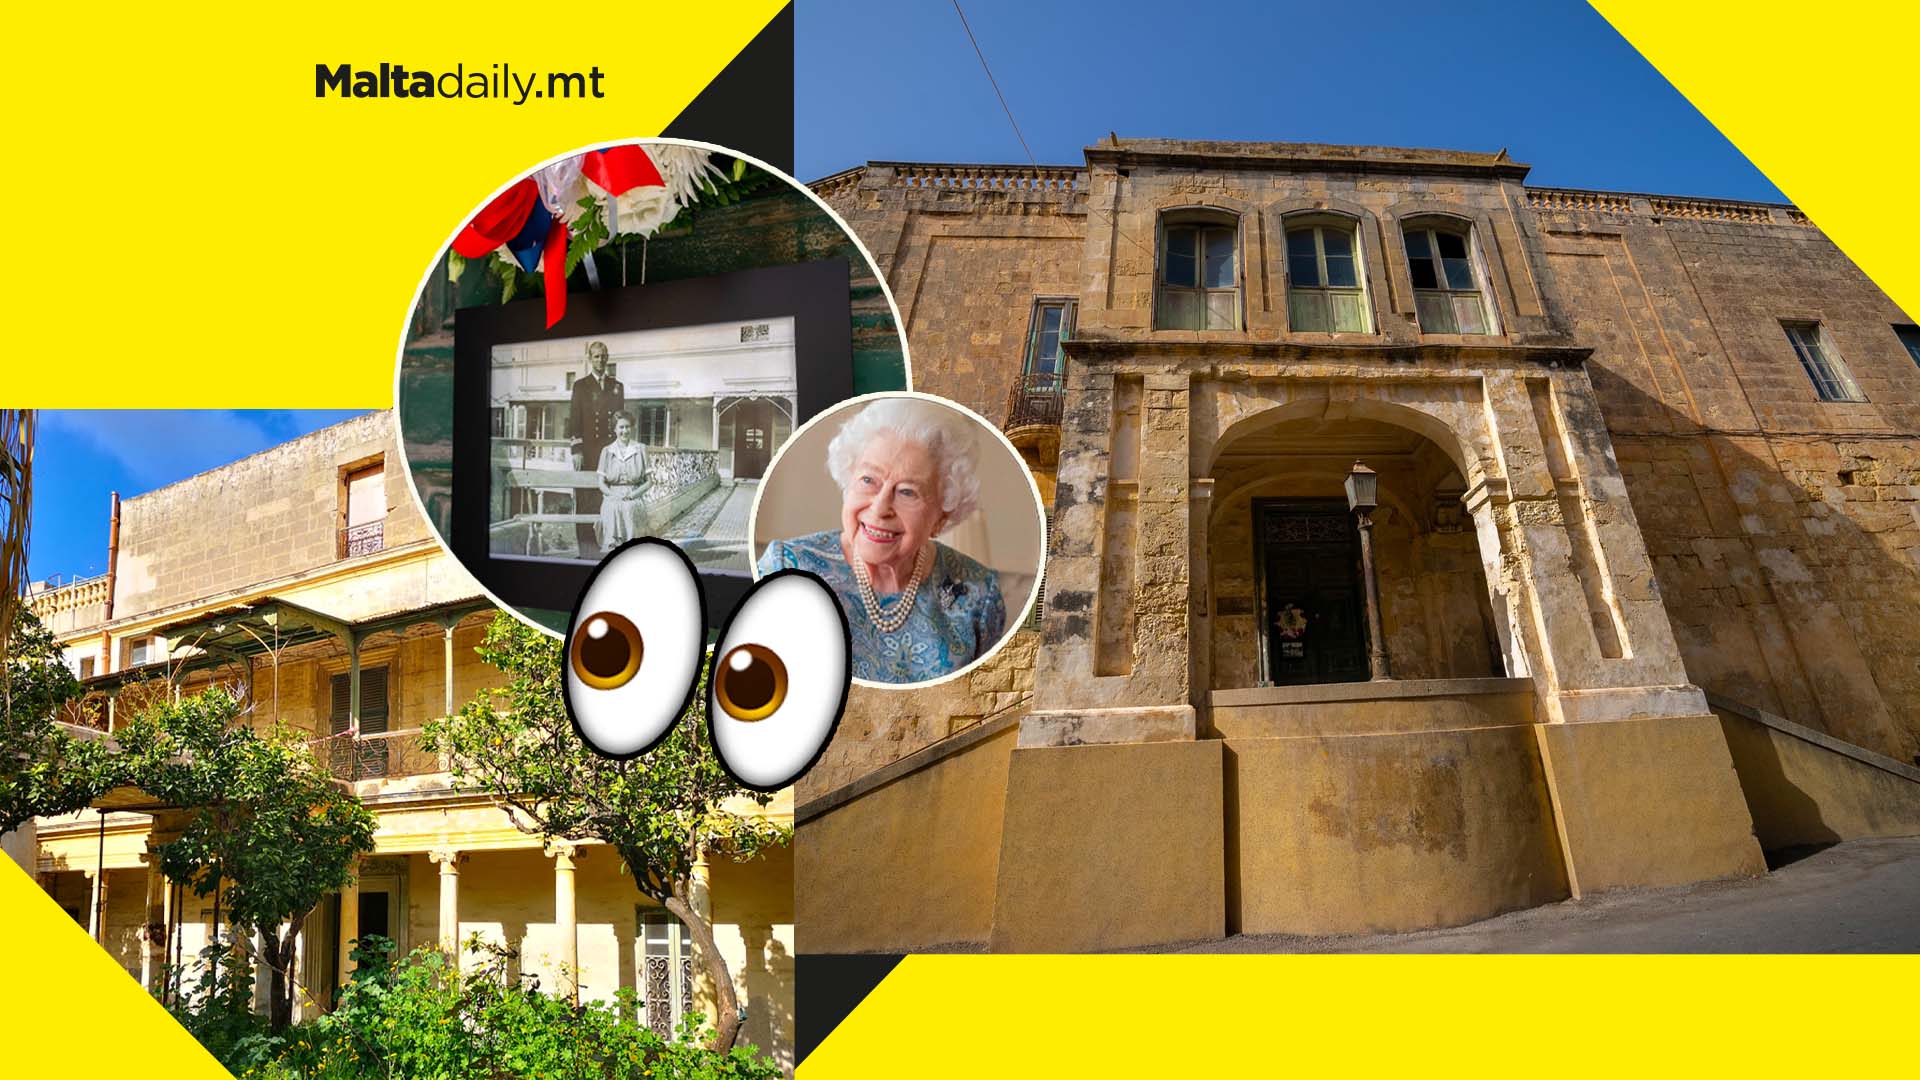 Check out the villa Queen Elizabeth lived in while in Malta